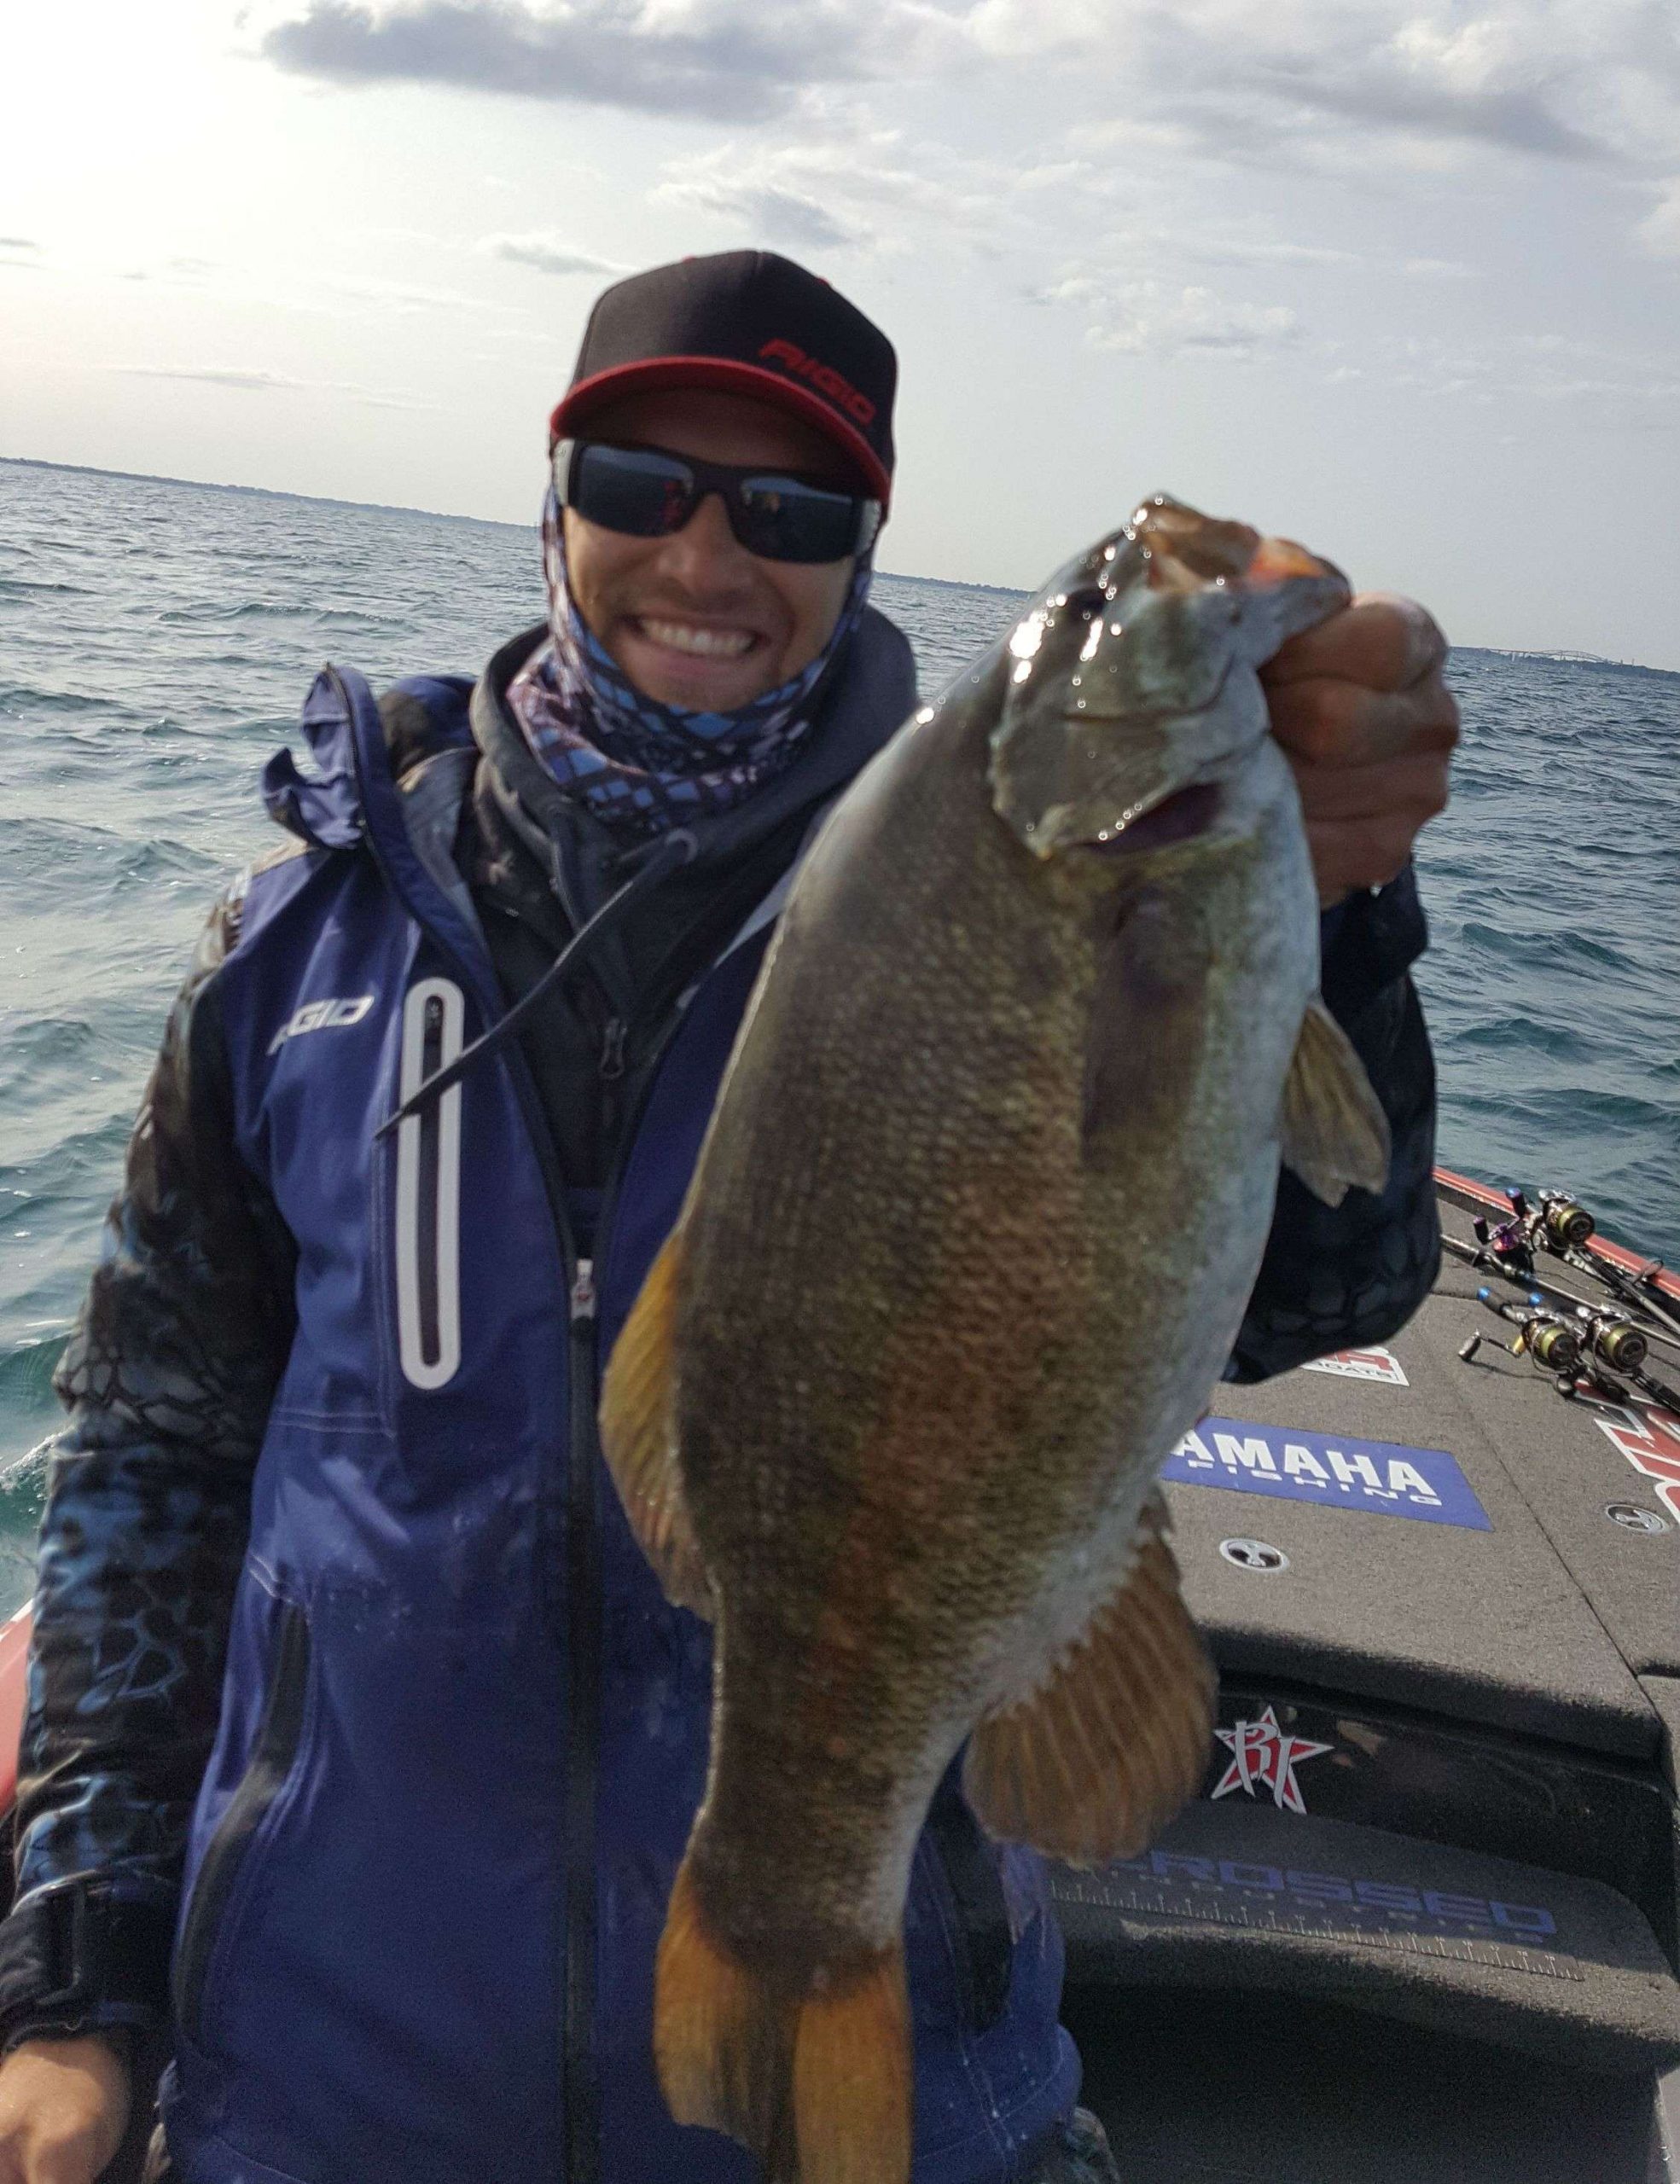 The haul to Lake Huron pays off for Brandon Palaniuk.  His second big fish goes in the live well.  